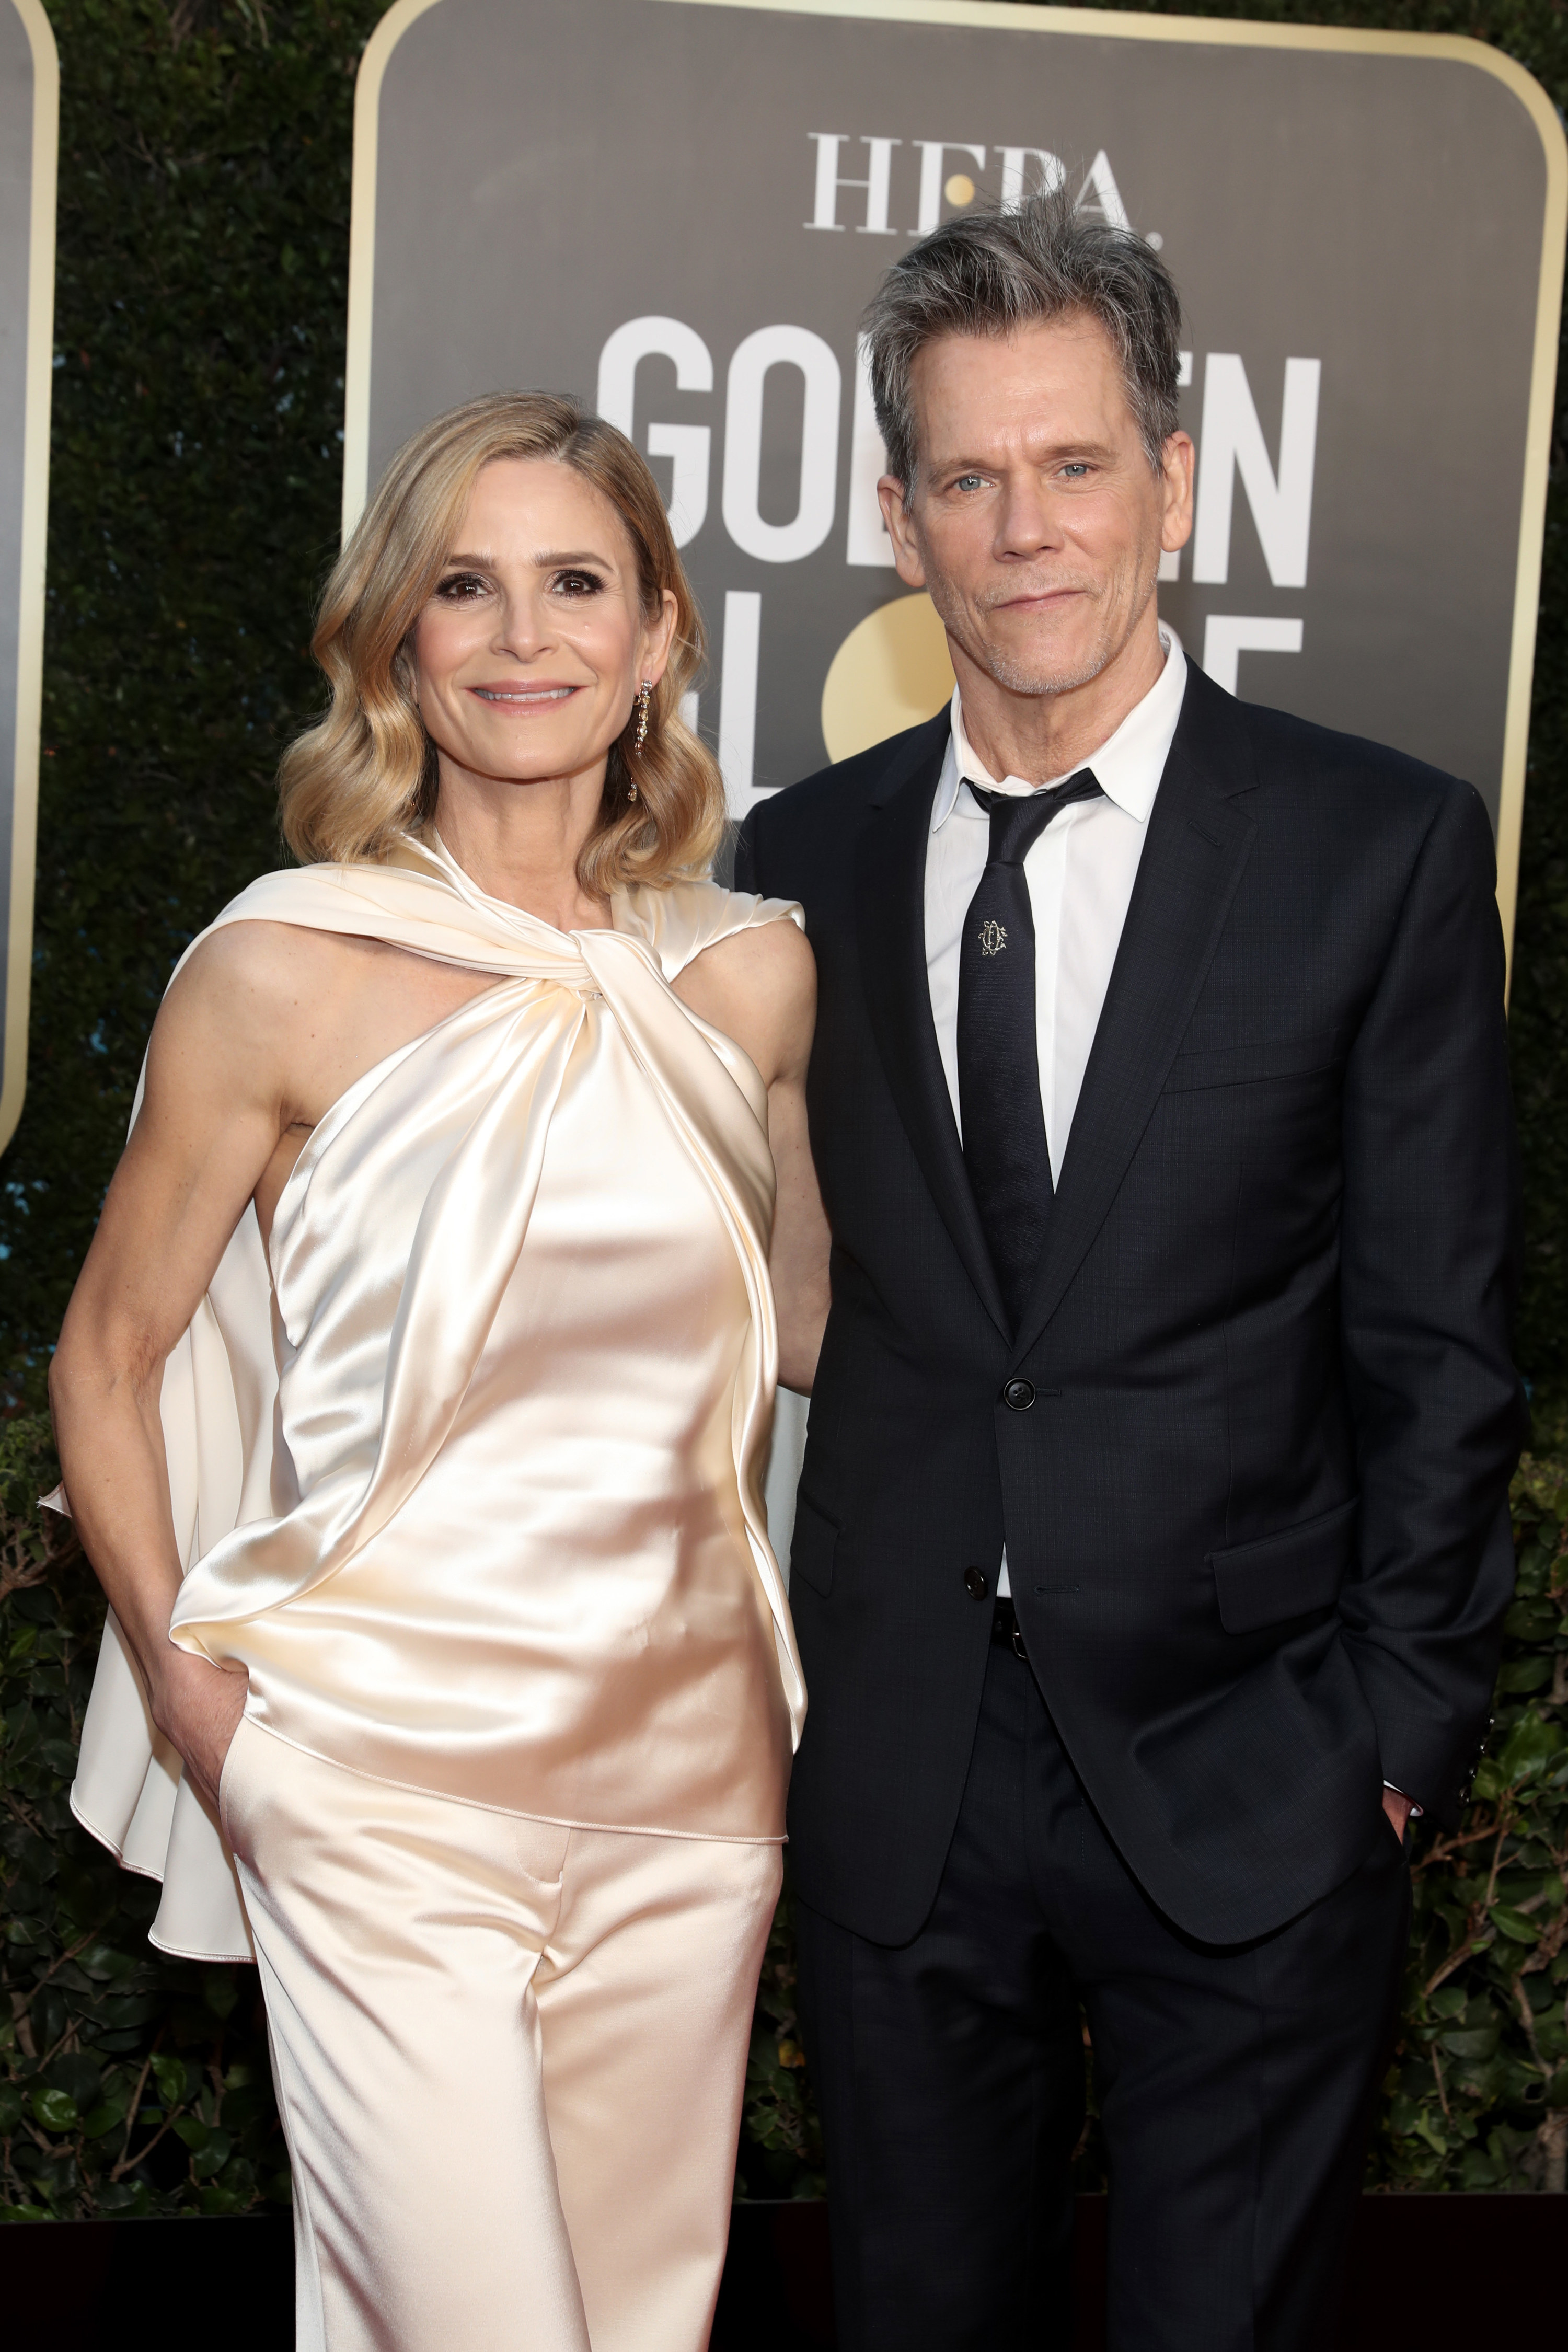 Kyra Sedgwick and Kevin Bacon at the 78th Annual Golden Globe Awards on February 28, 2021